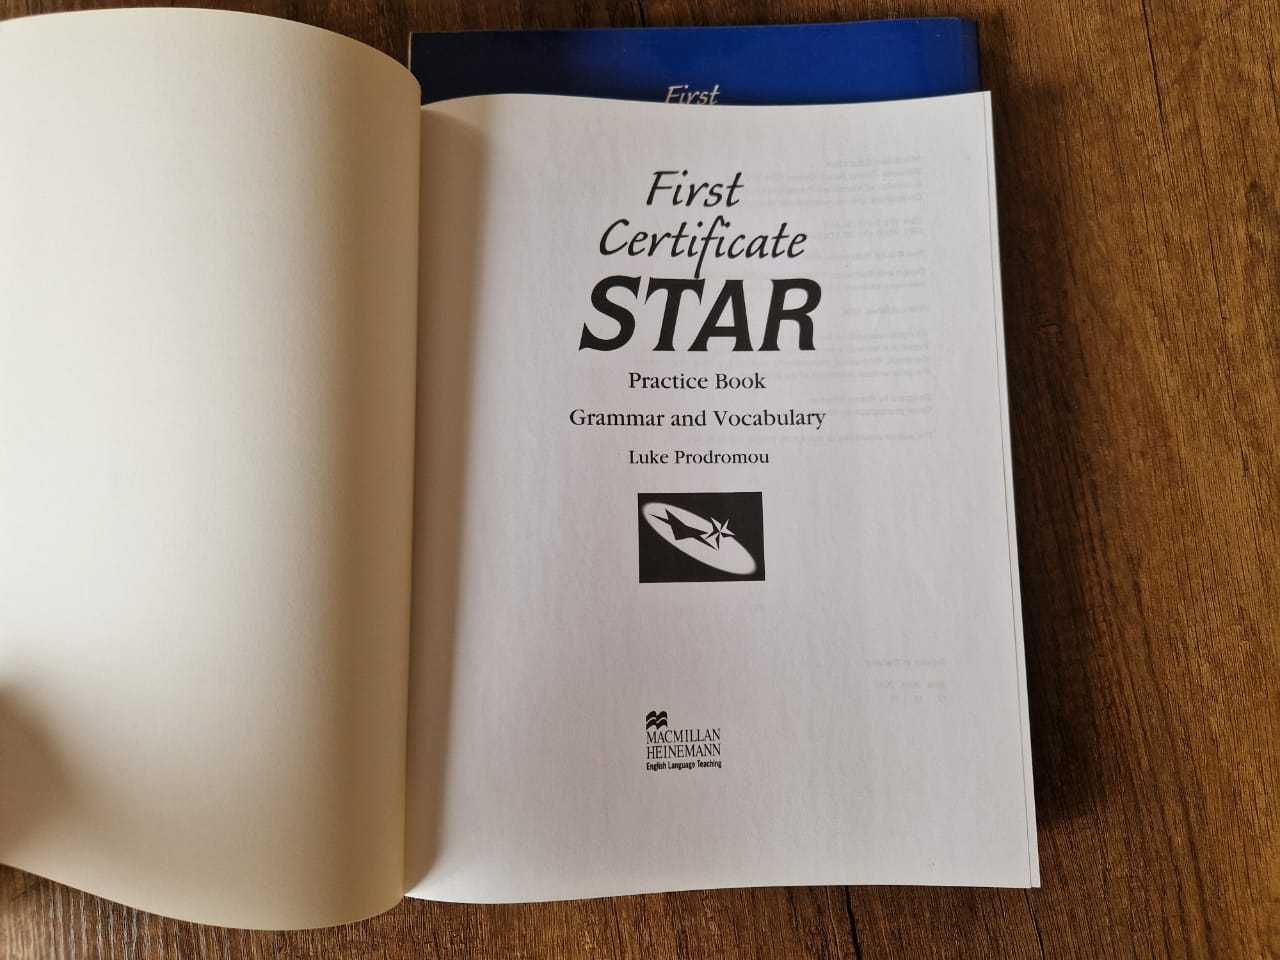 First Certificate Star - Student's and Practice Book (Macmillan)